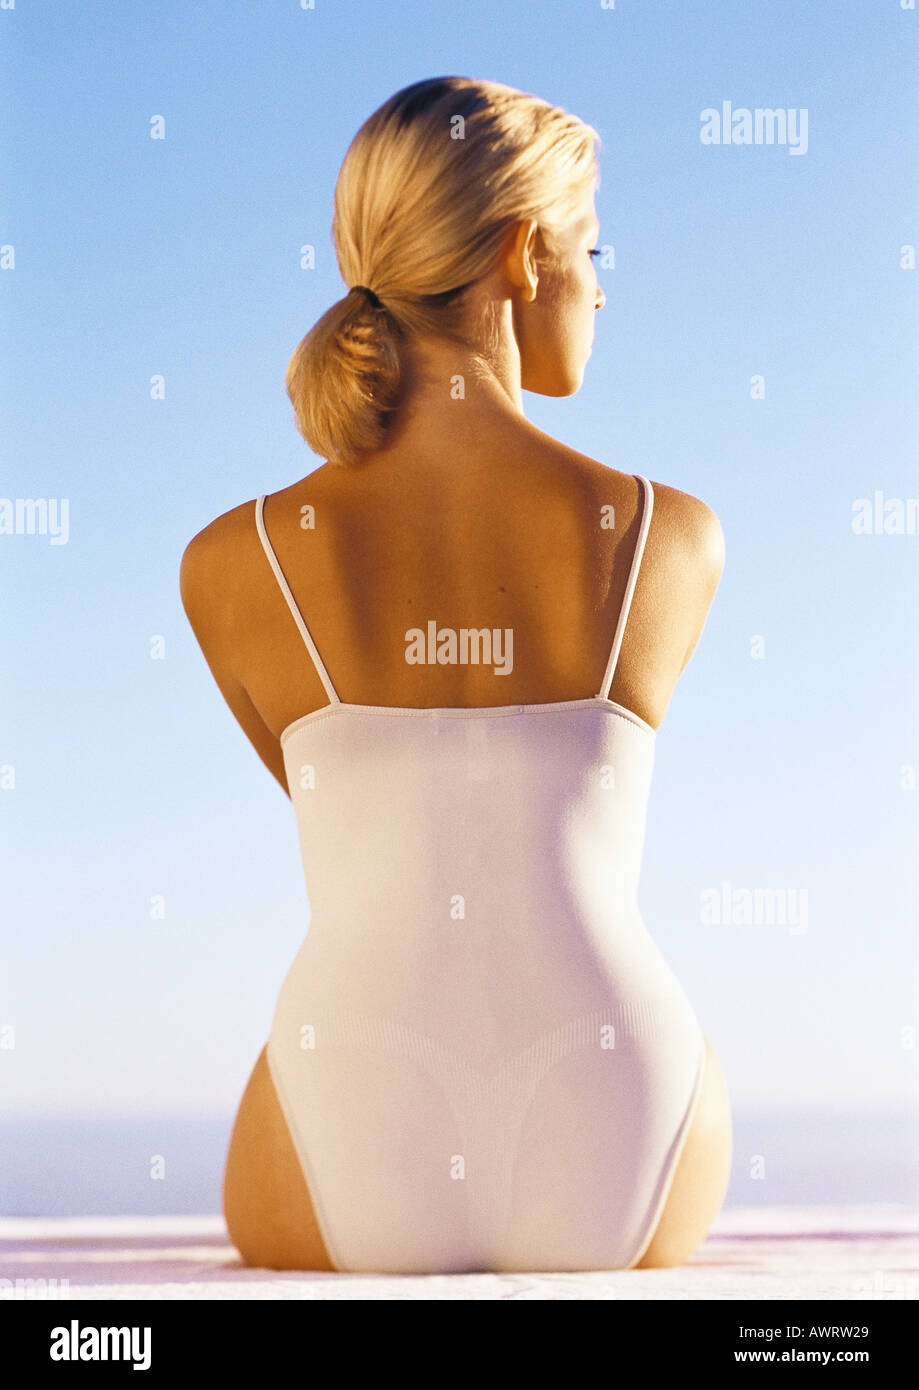 Woman in one-piece bathing suit, rear view, close-up Stock Photo